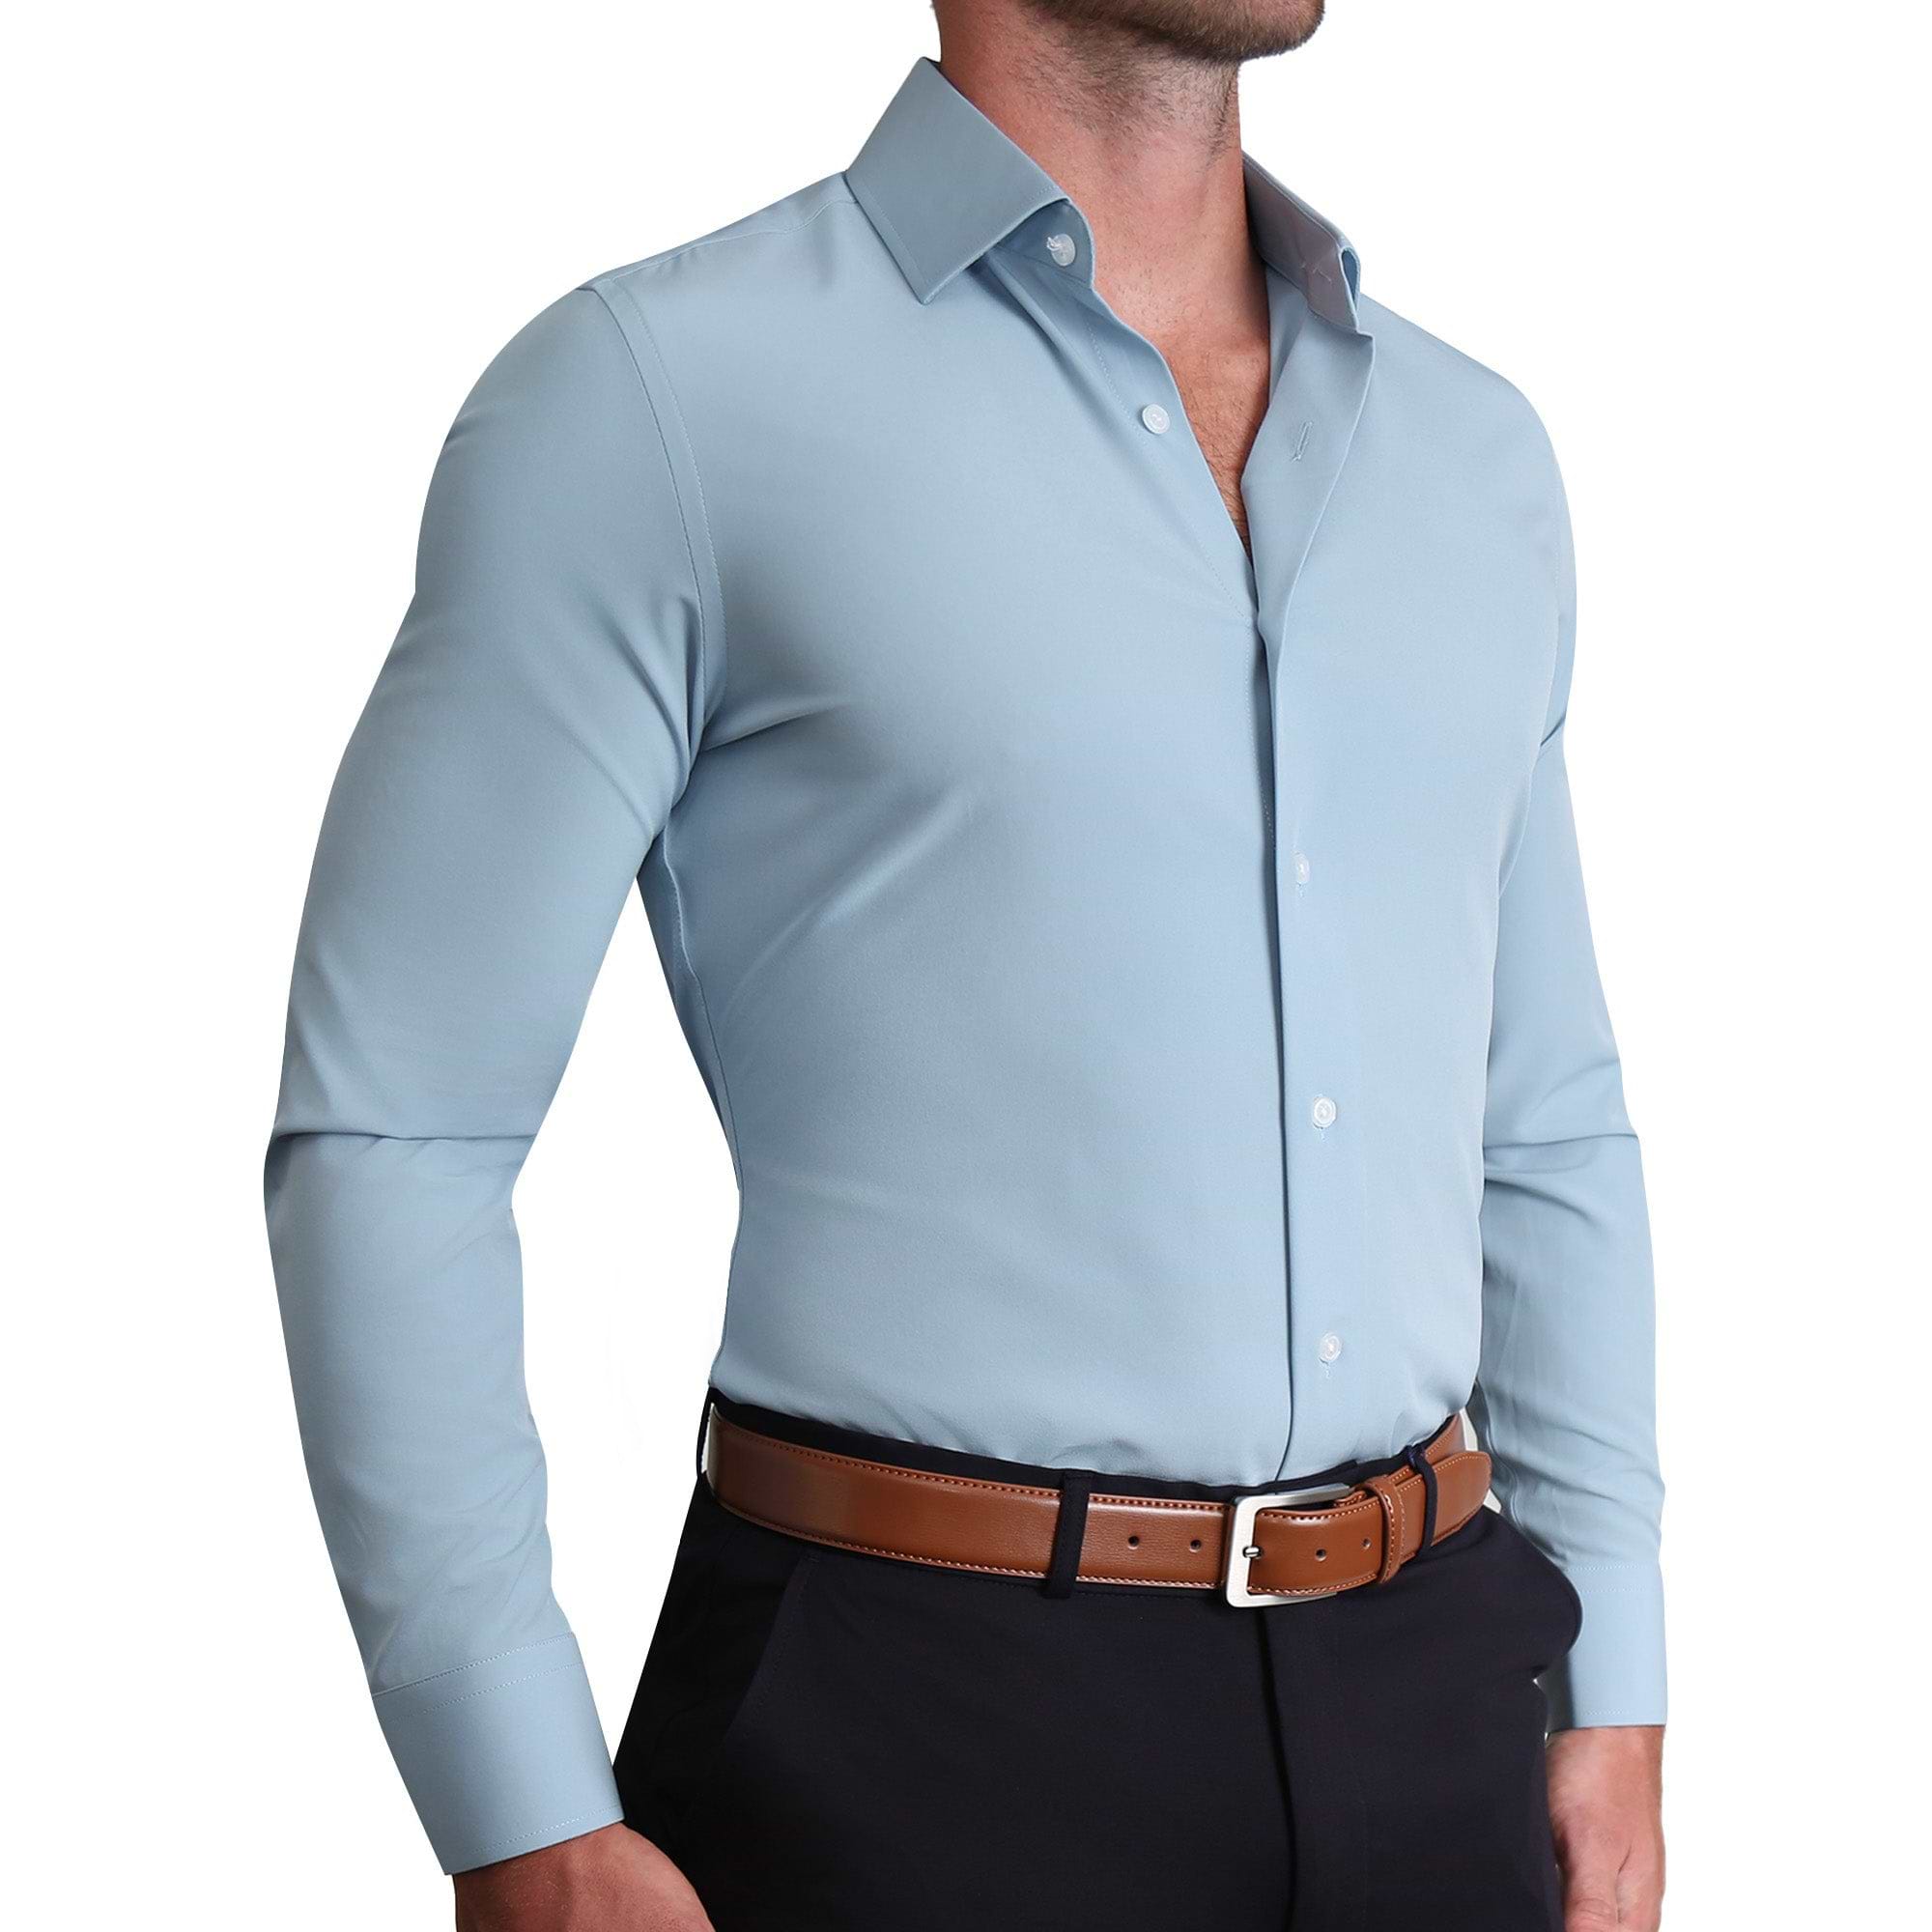 The 13 Best Shirts for Men with a Muscular Build - The Manual